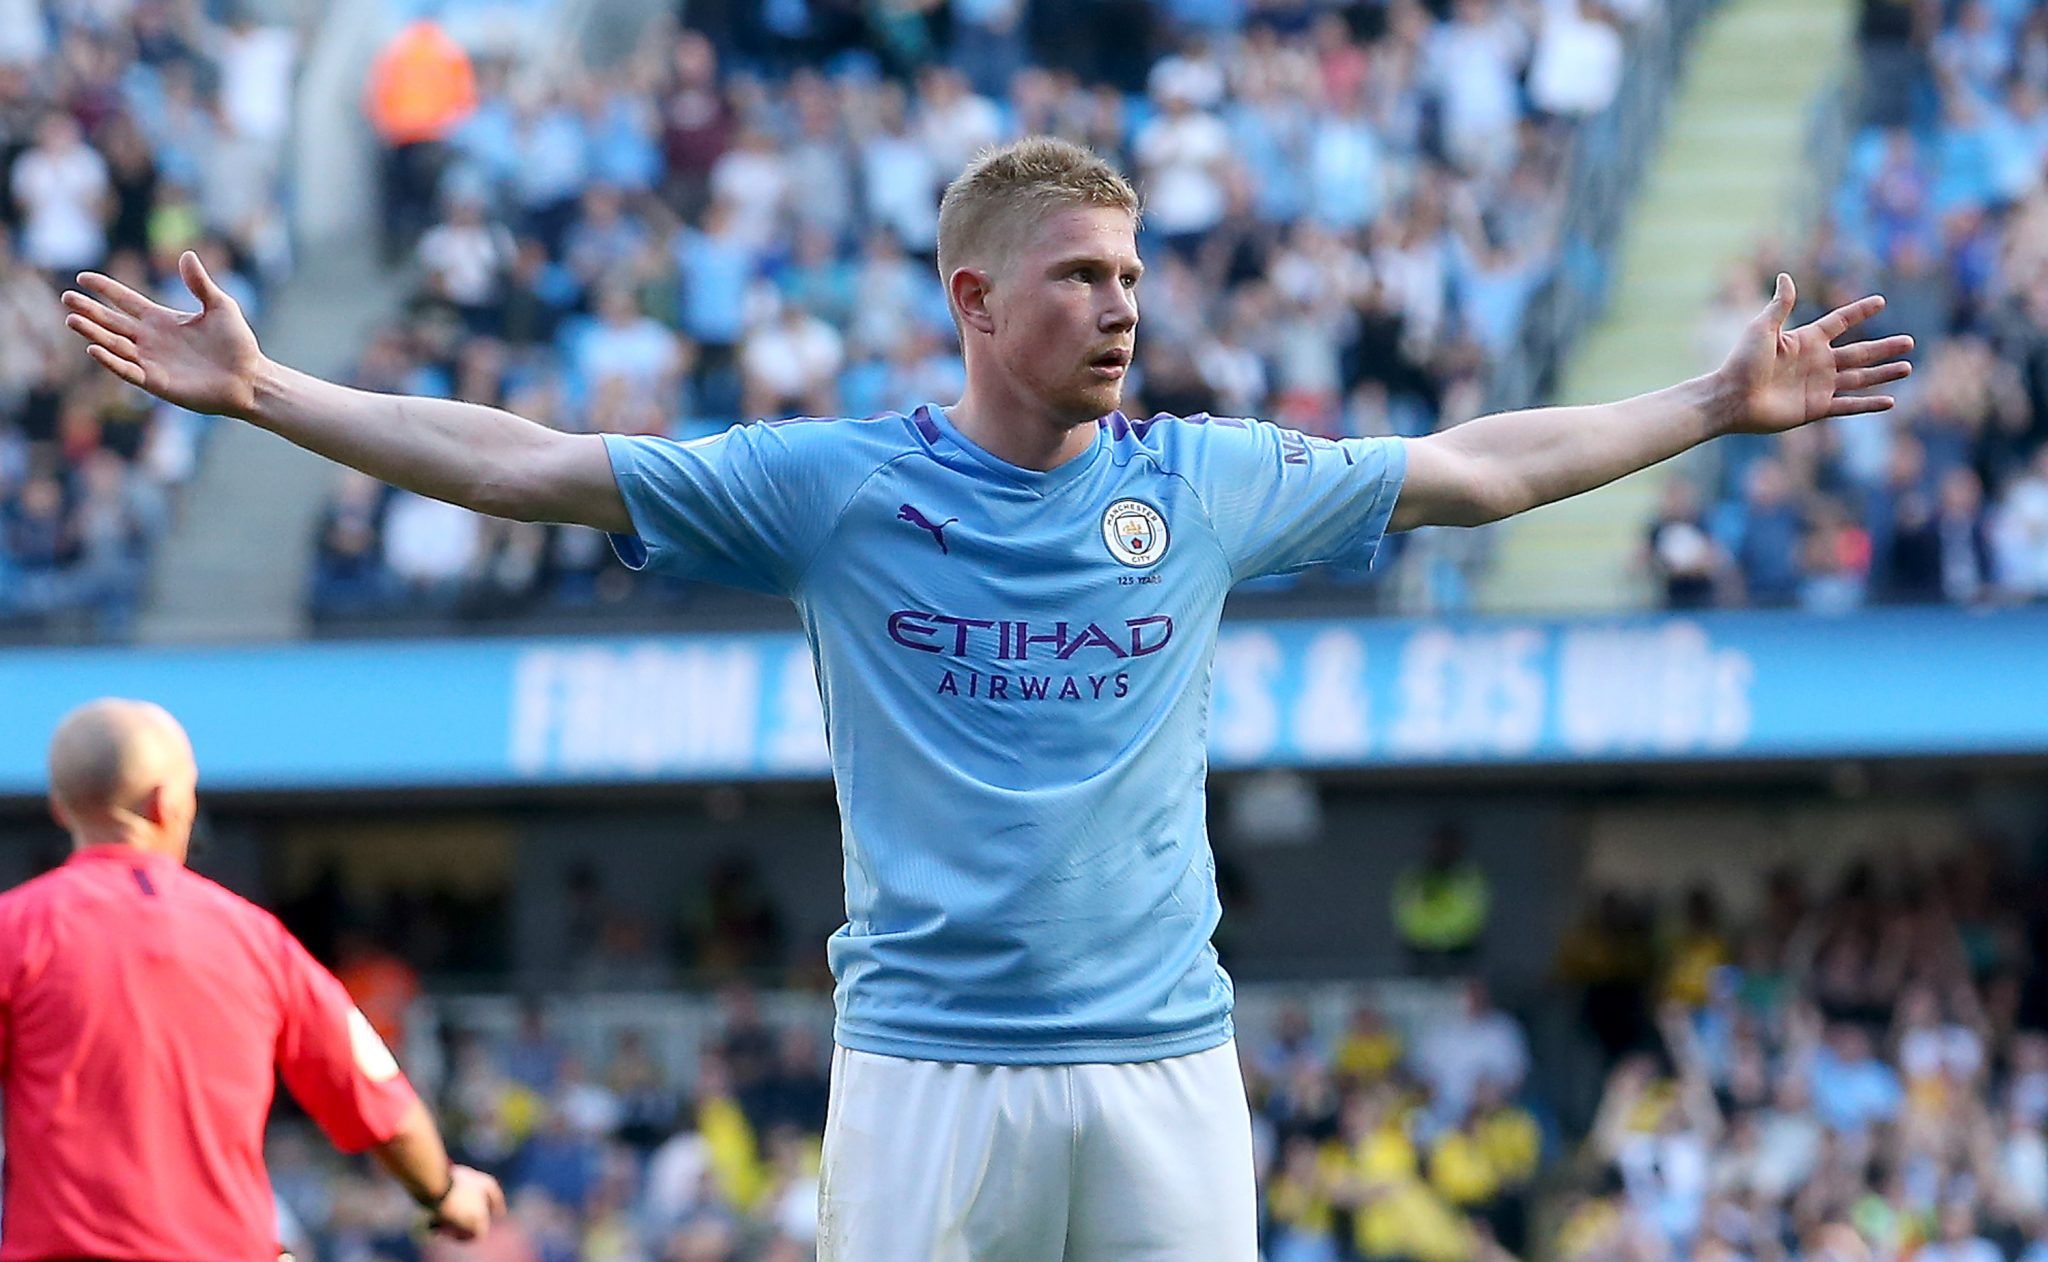 An incomplete list of things Kevin De Bruyne could assist | JOE.co.uk